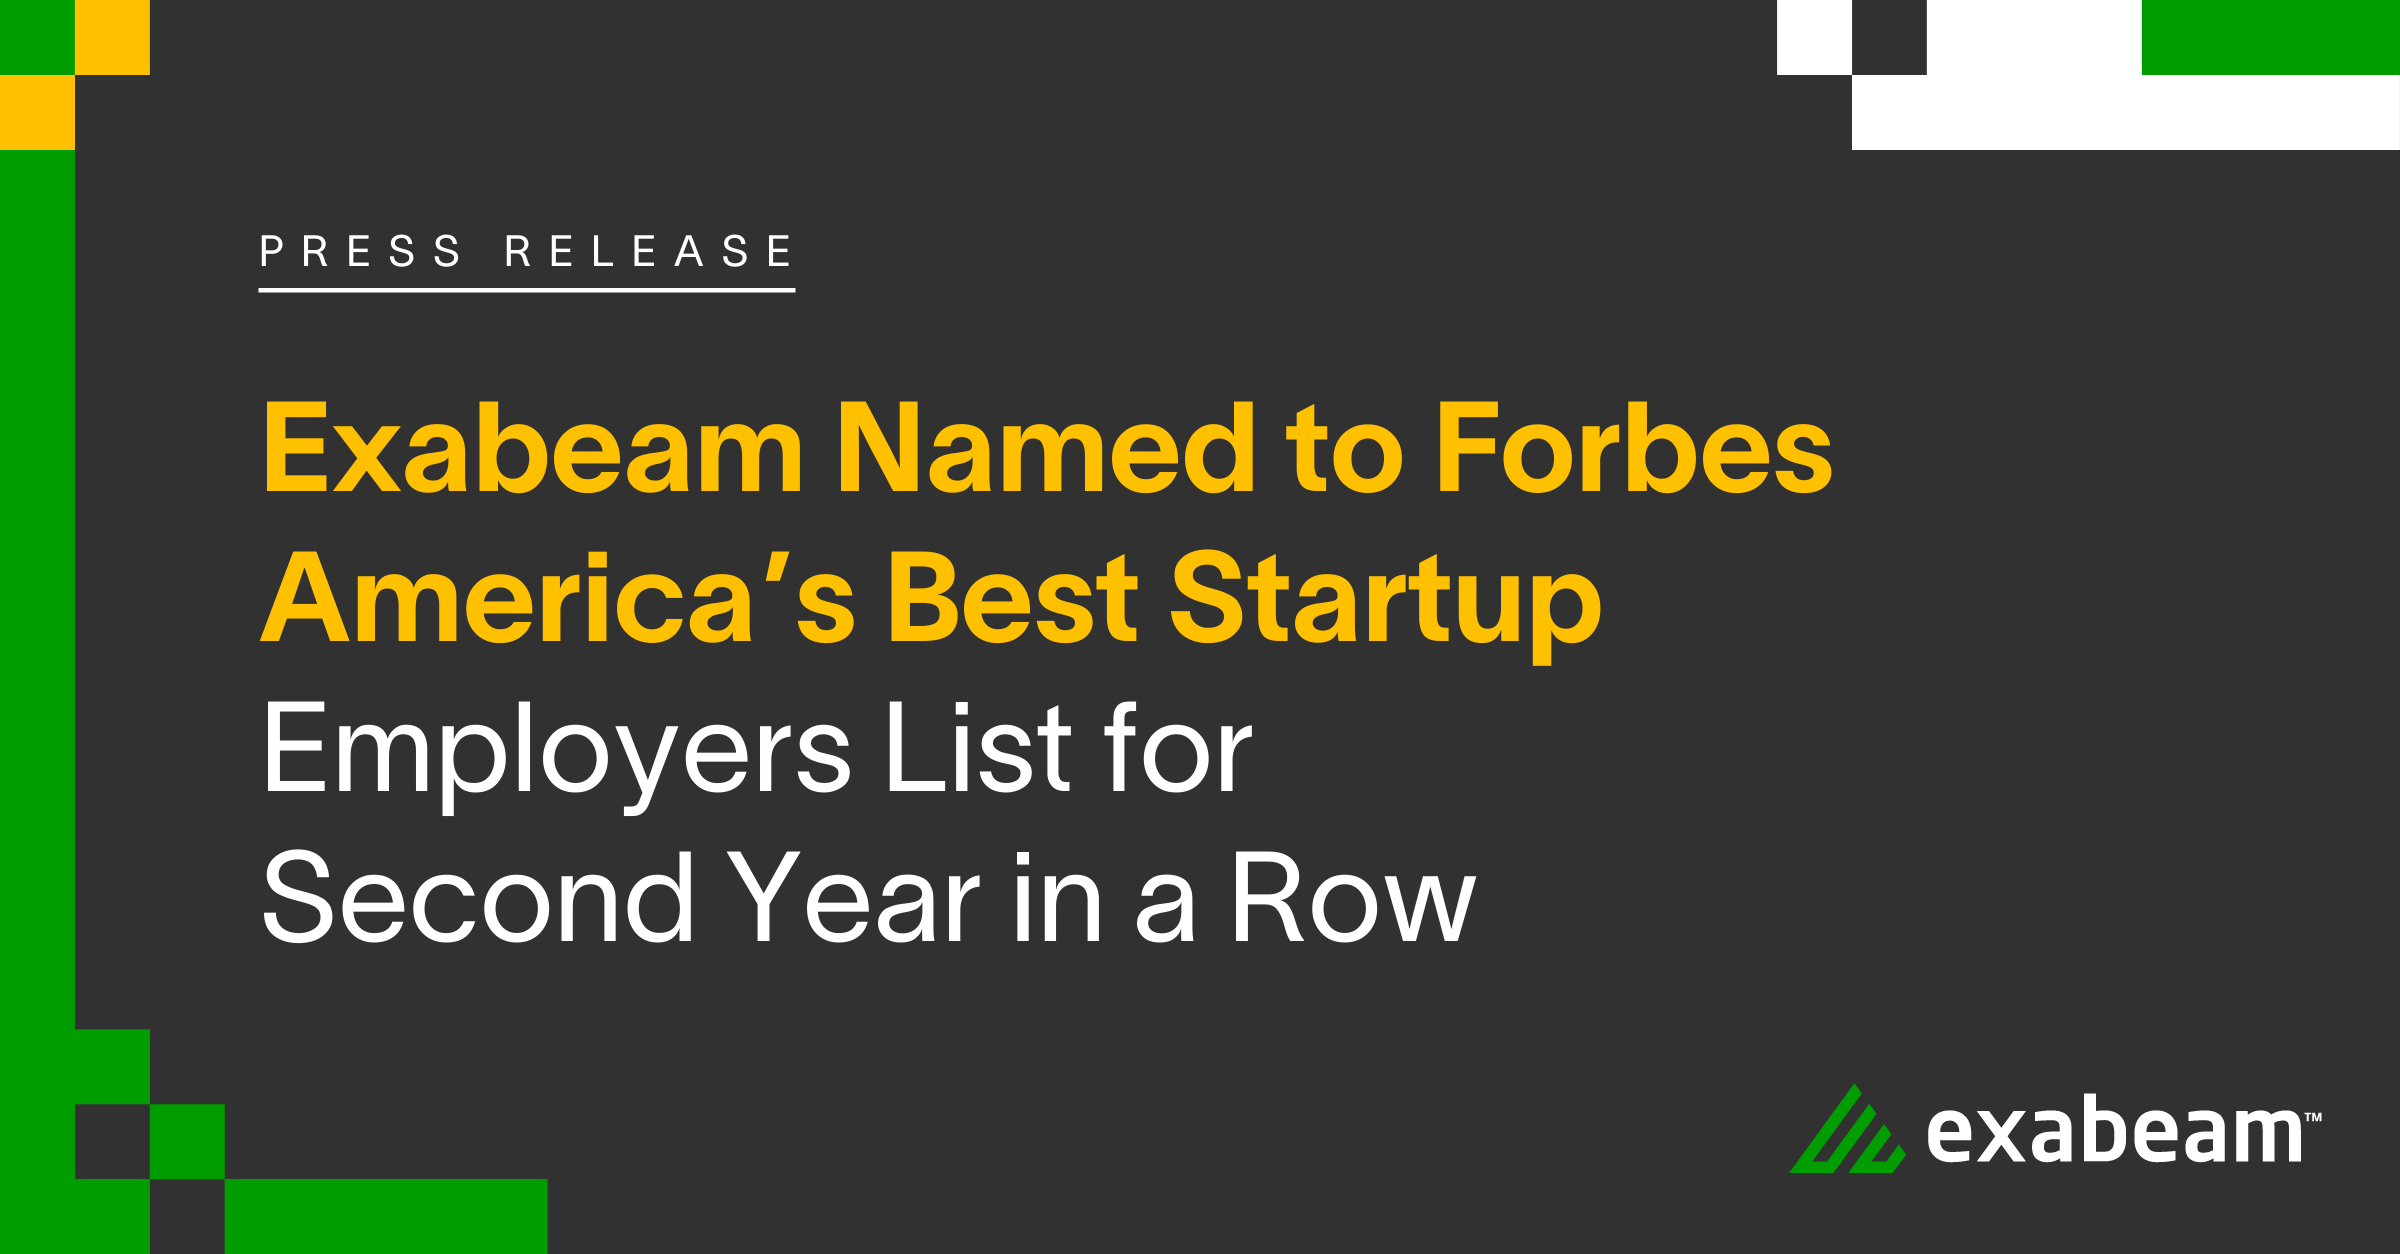 Exabeam Named to Forbes America’s Best Startup Employers List for Second Year in a Row